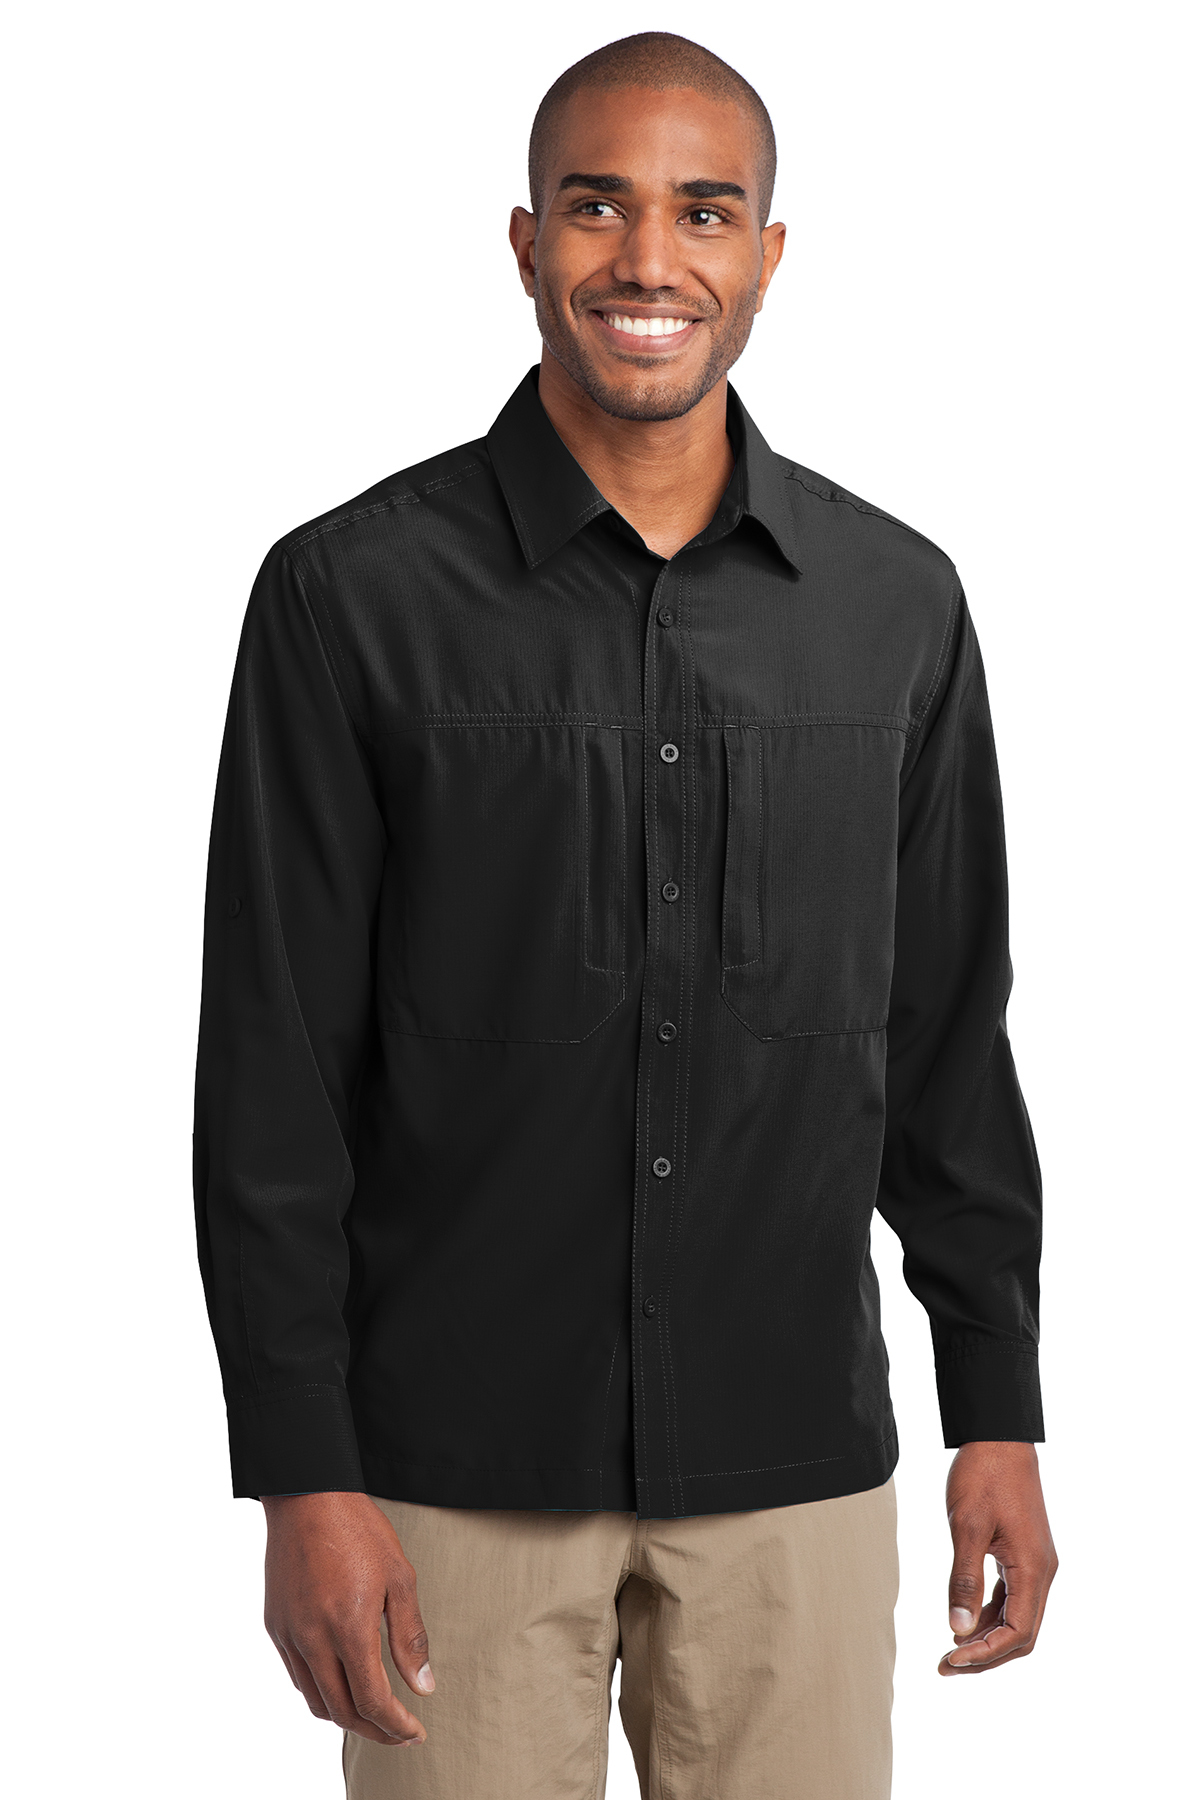 CLOSEOUT Eddie Bauer - Long Sleeve Performance Travel Shirt | Product ...